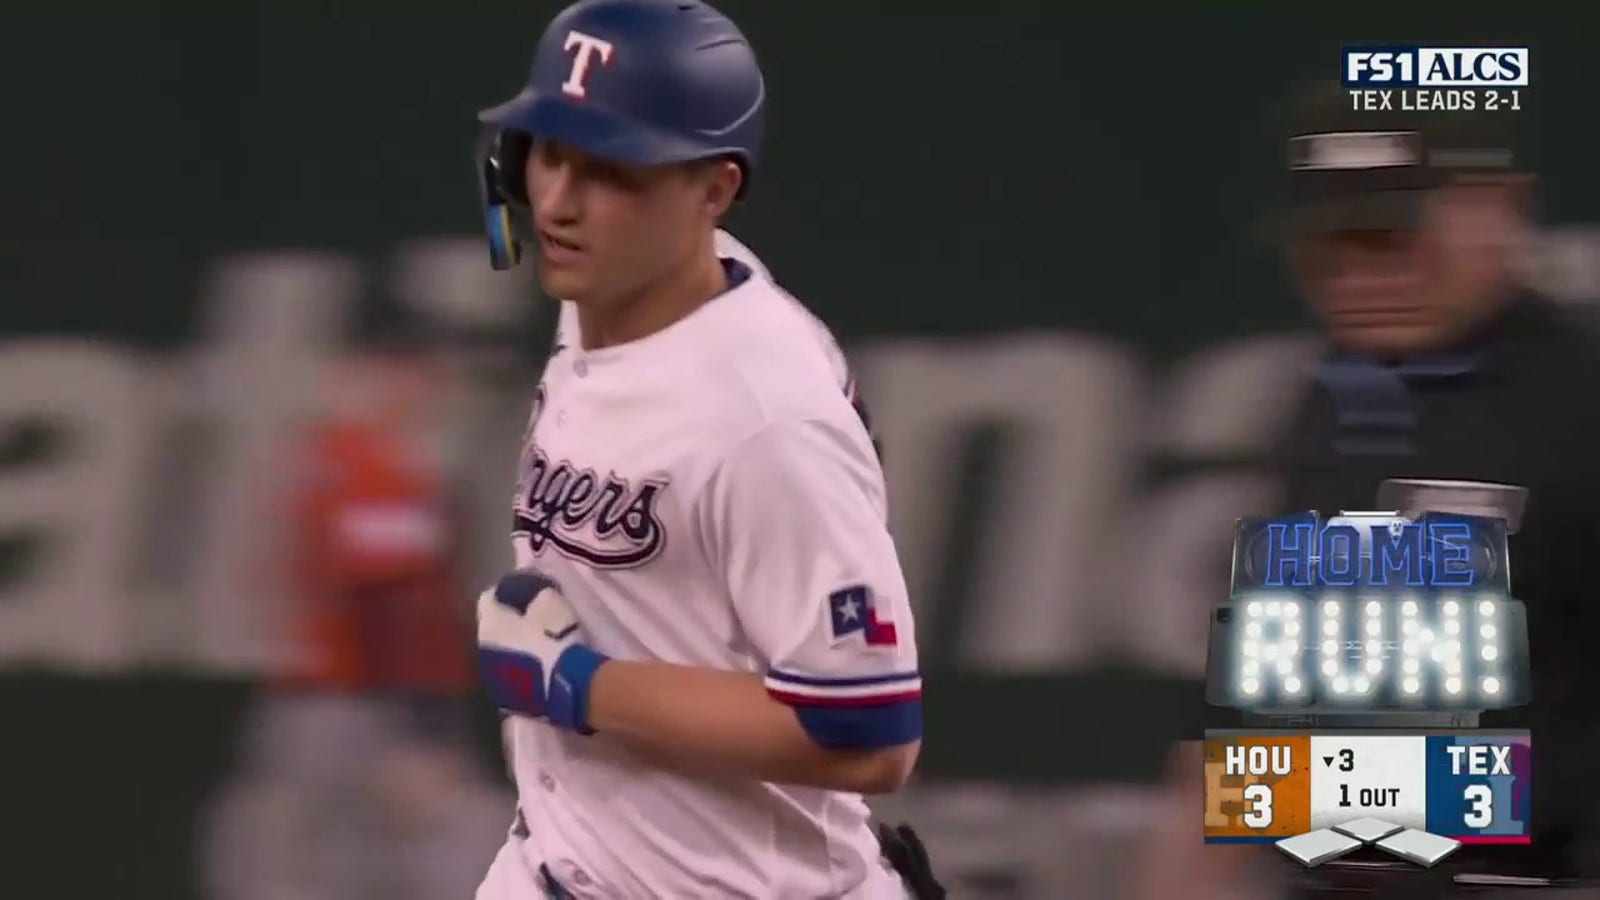 Rangers' Corey Seager blasts solo home run to tie game vs. Astros